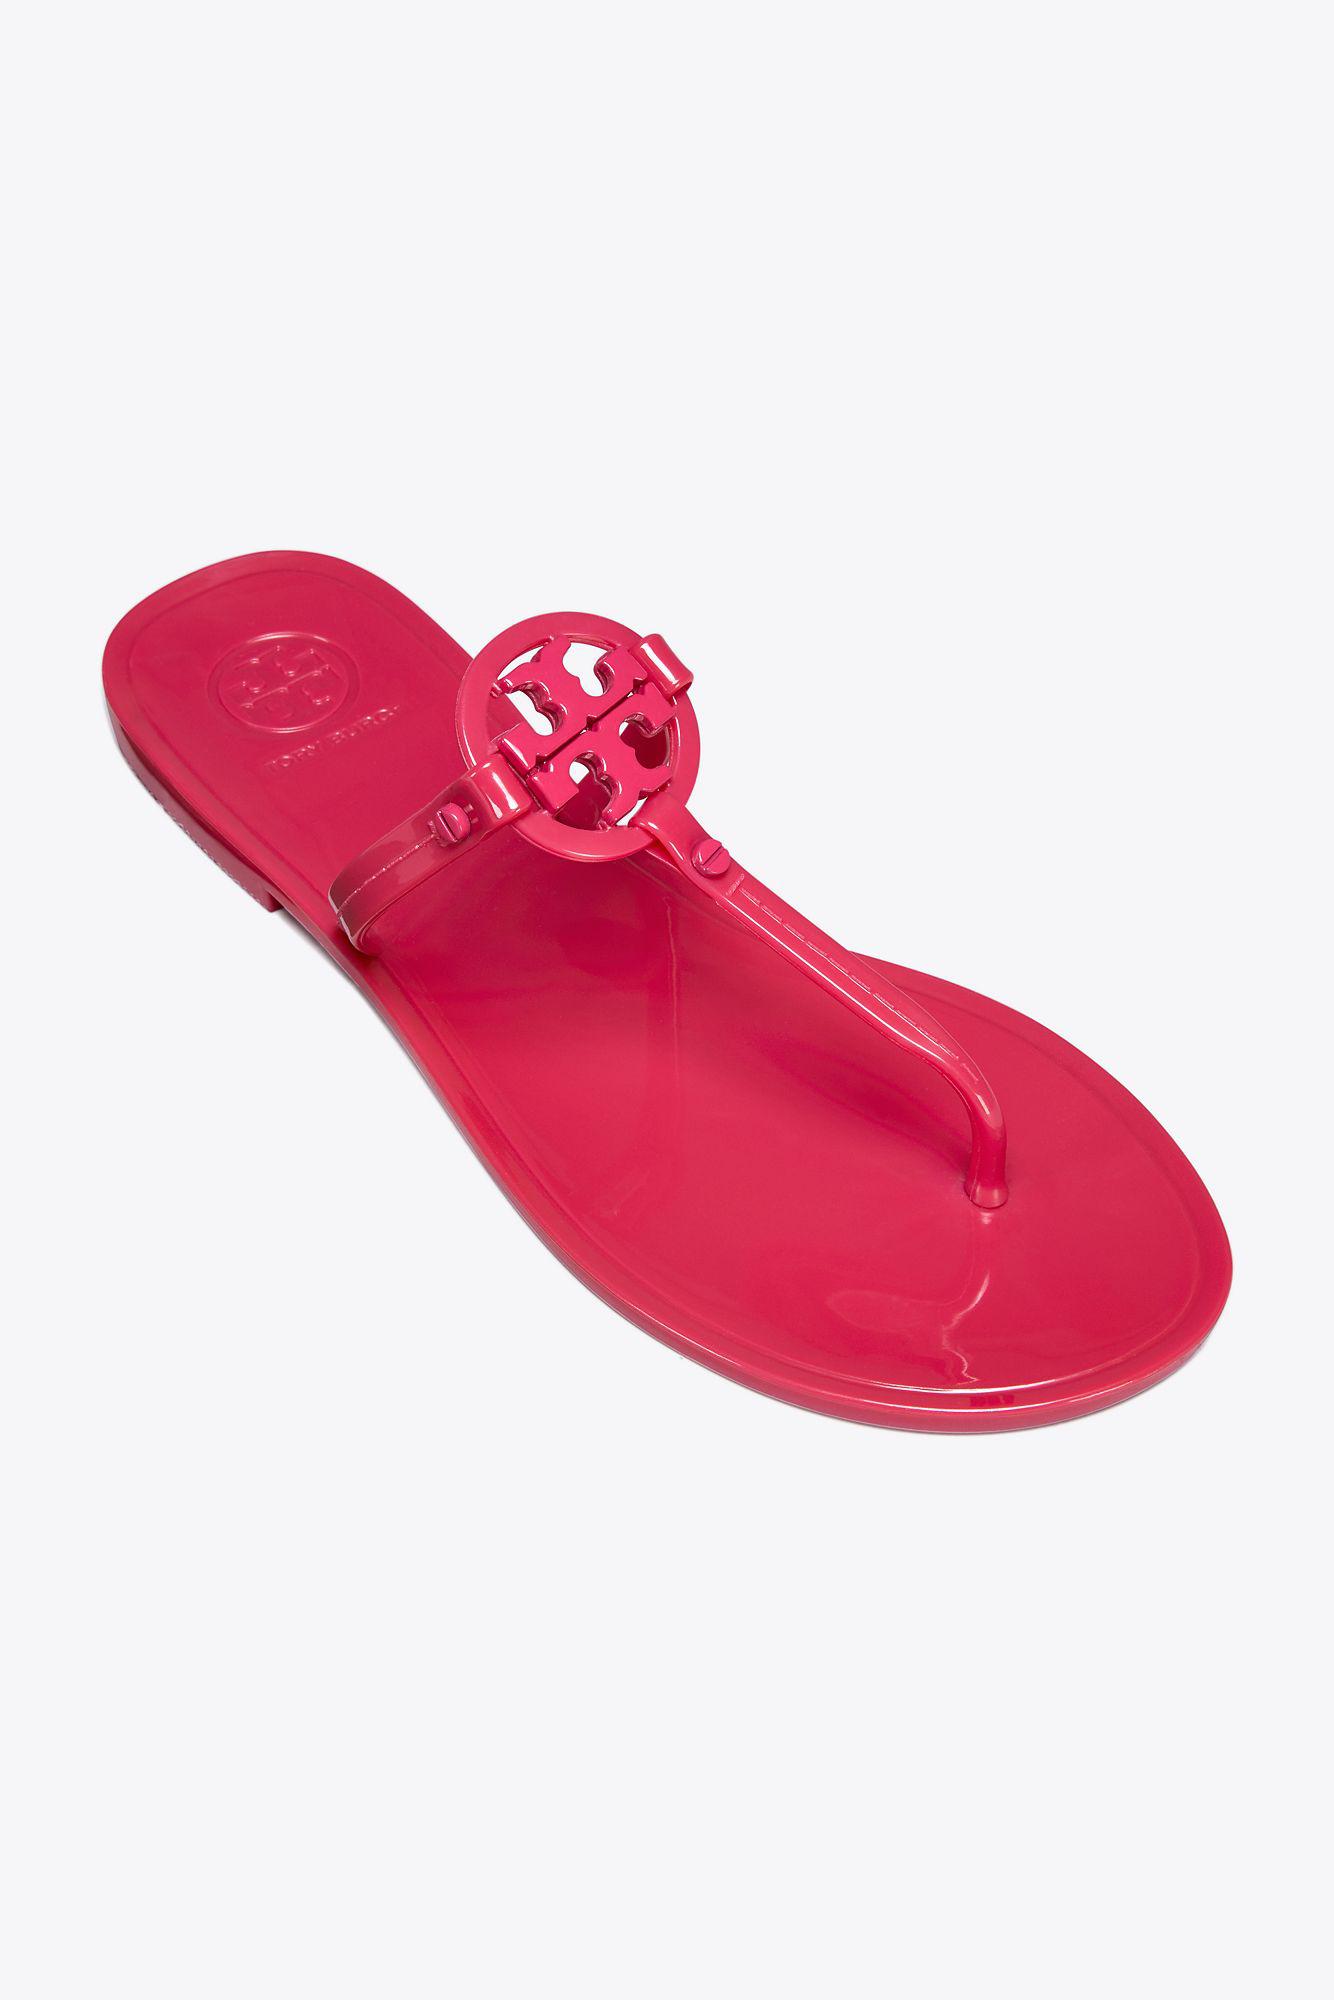 Tory Burch Pink Jelly Sandals Portugal, SAVE 43% 